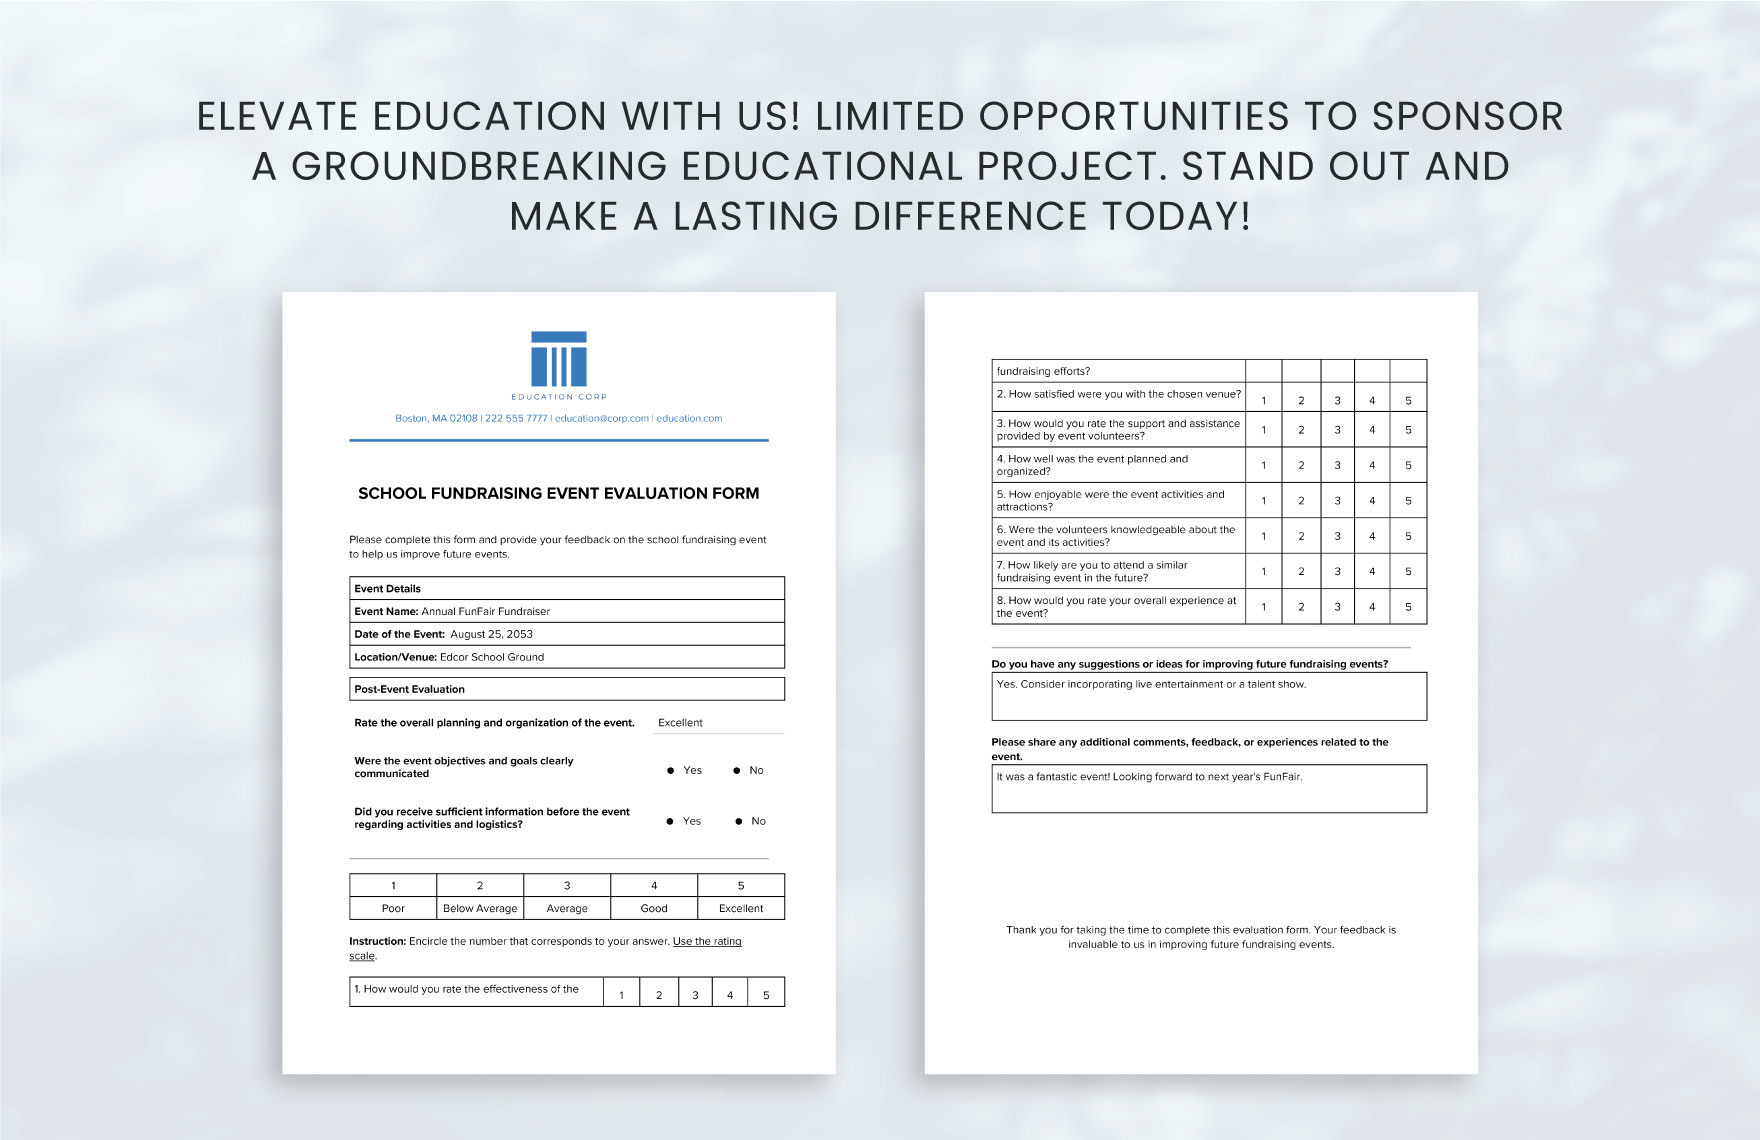 School Fundraising Event Evaluation Form Template